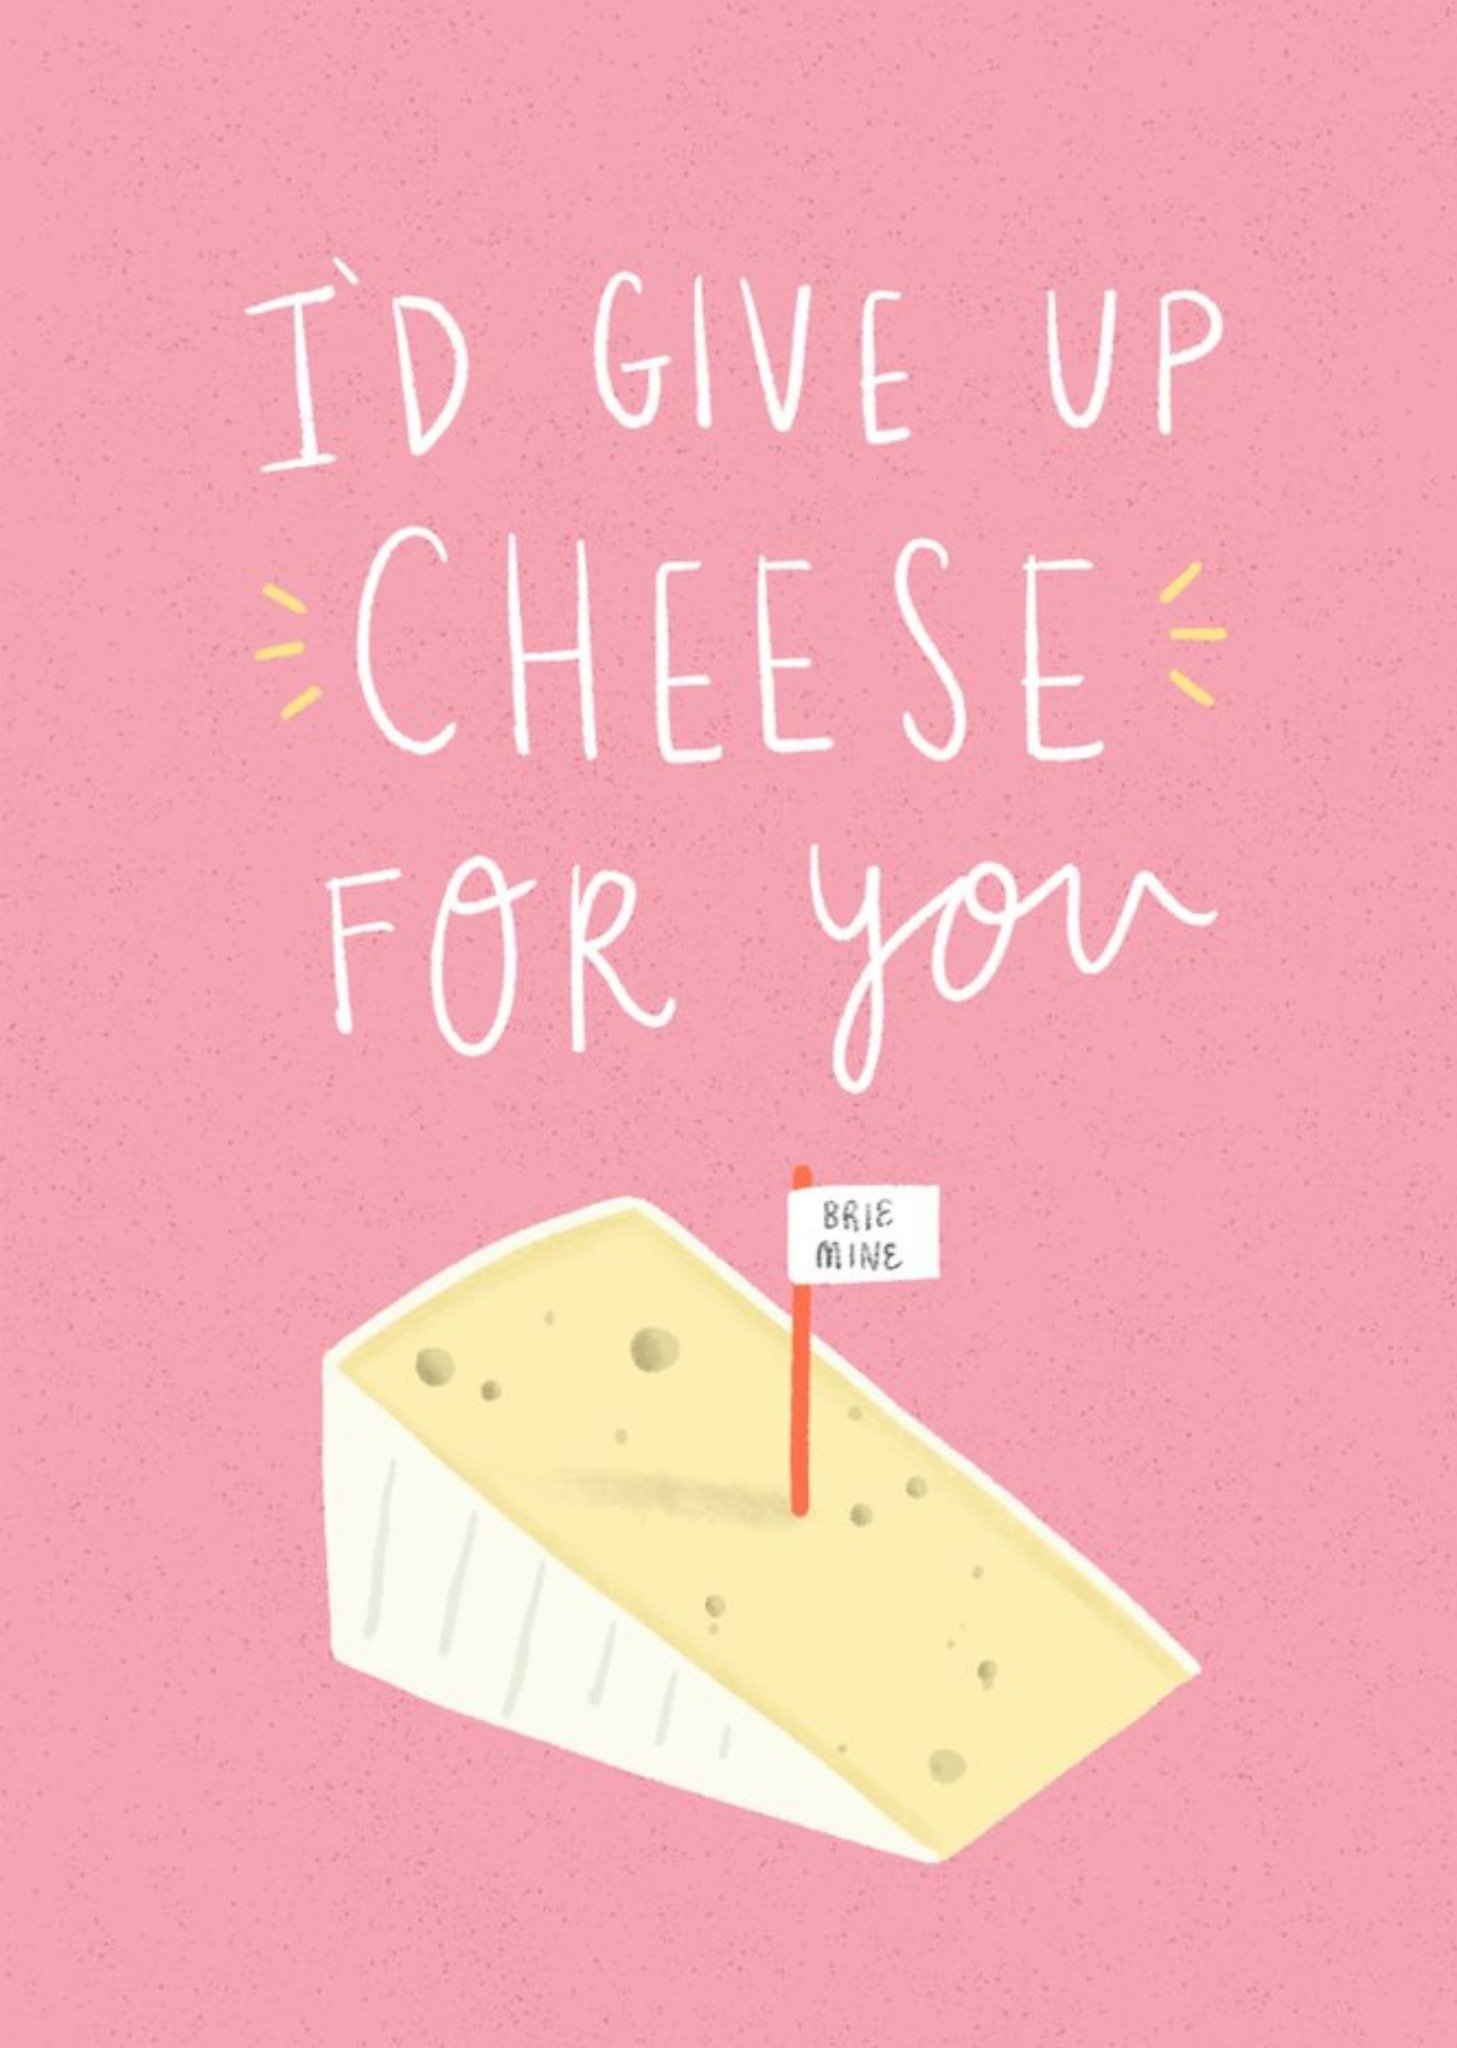 Moonpig Funny I'd Give Up Cheese For You Card Ecard